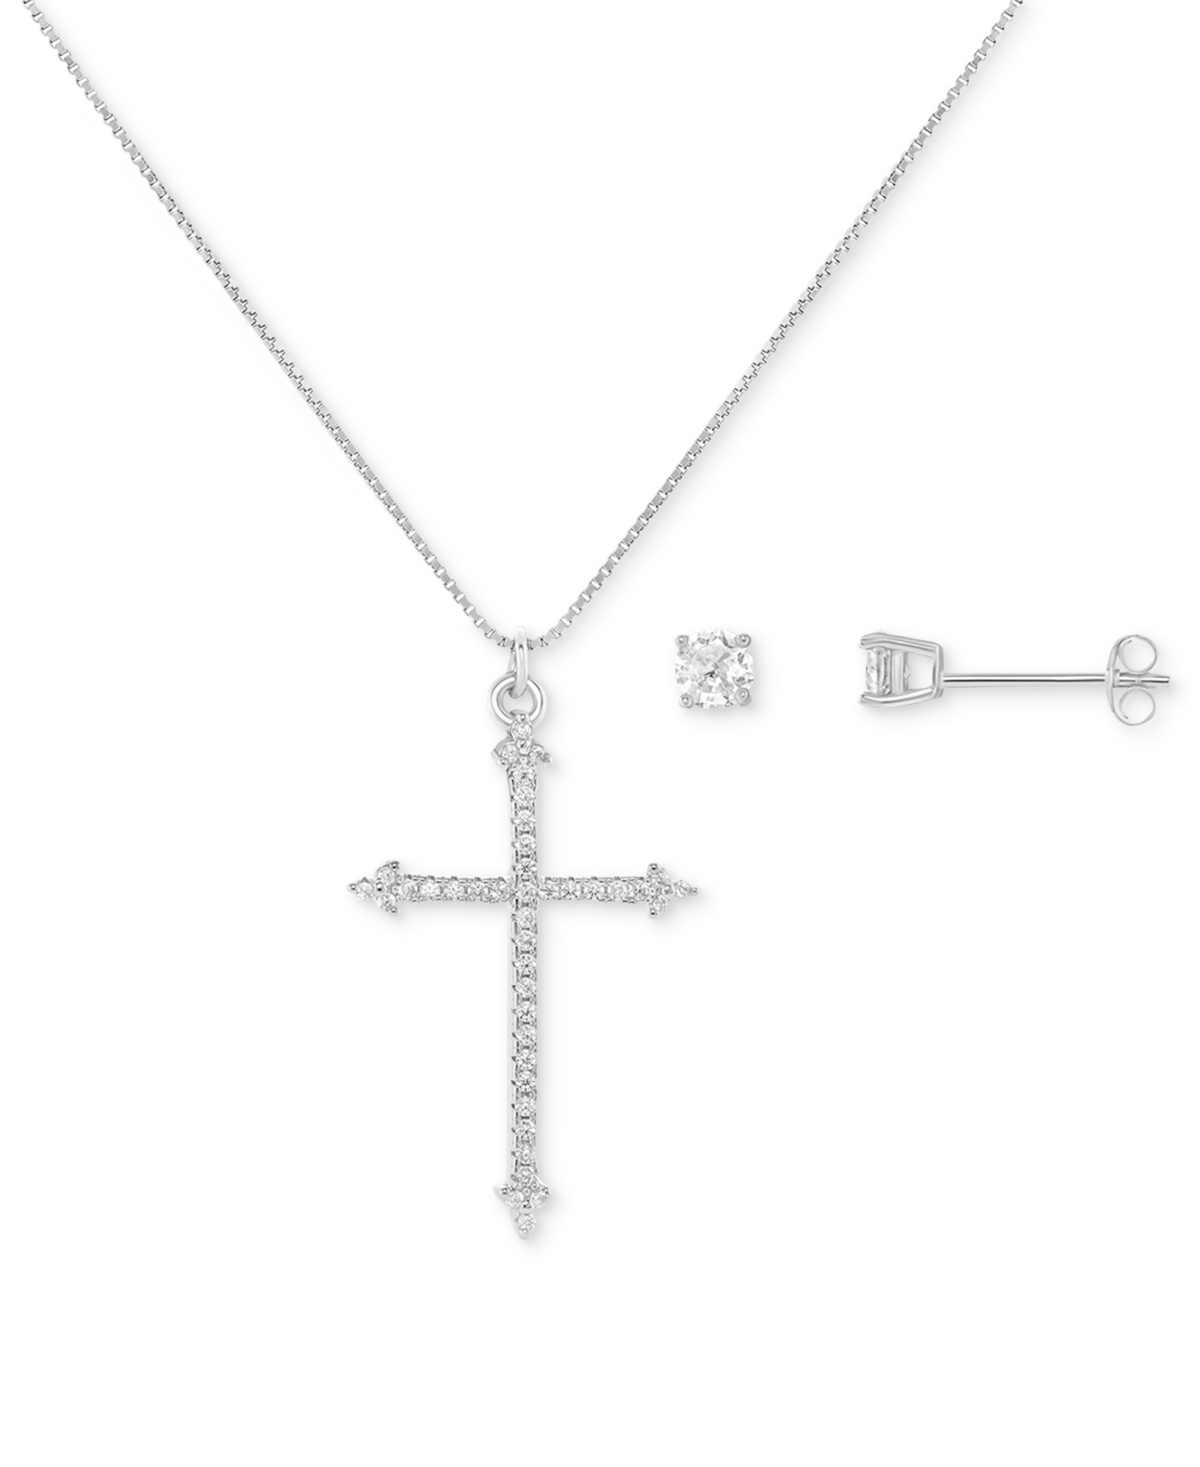 Giani Bernini 2-pc. St Cubic Zirconia Cross Pendant Necklace & Solitaire Stud Earrings In Sterling Silver, Created